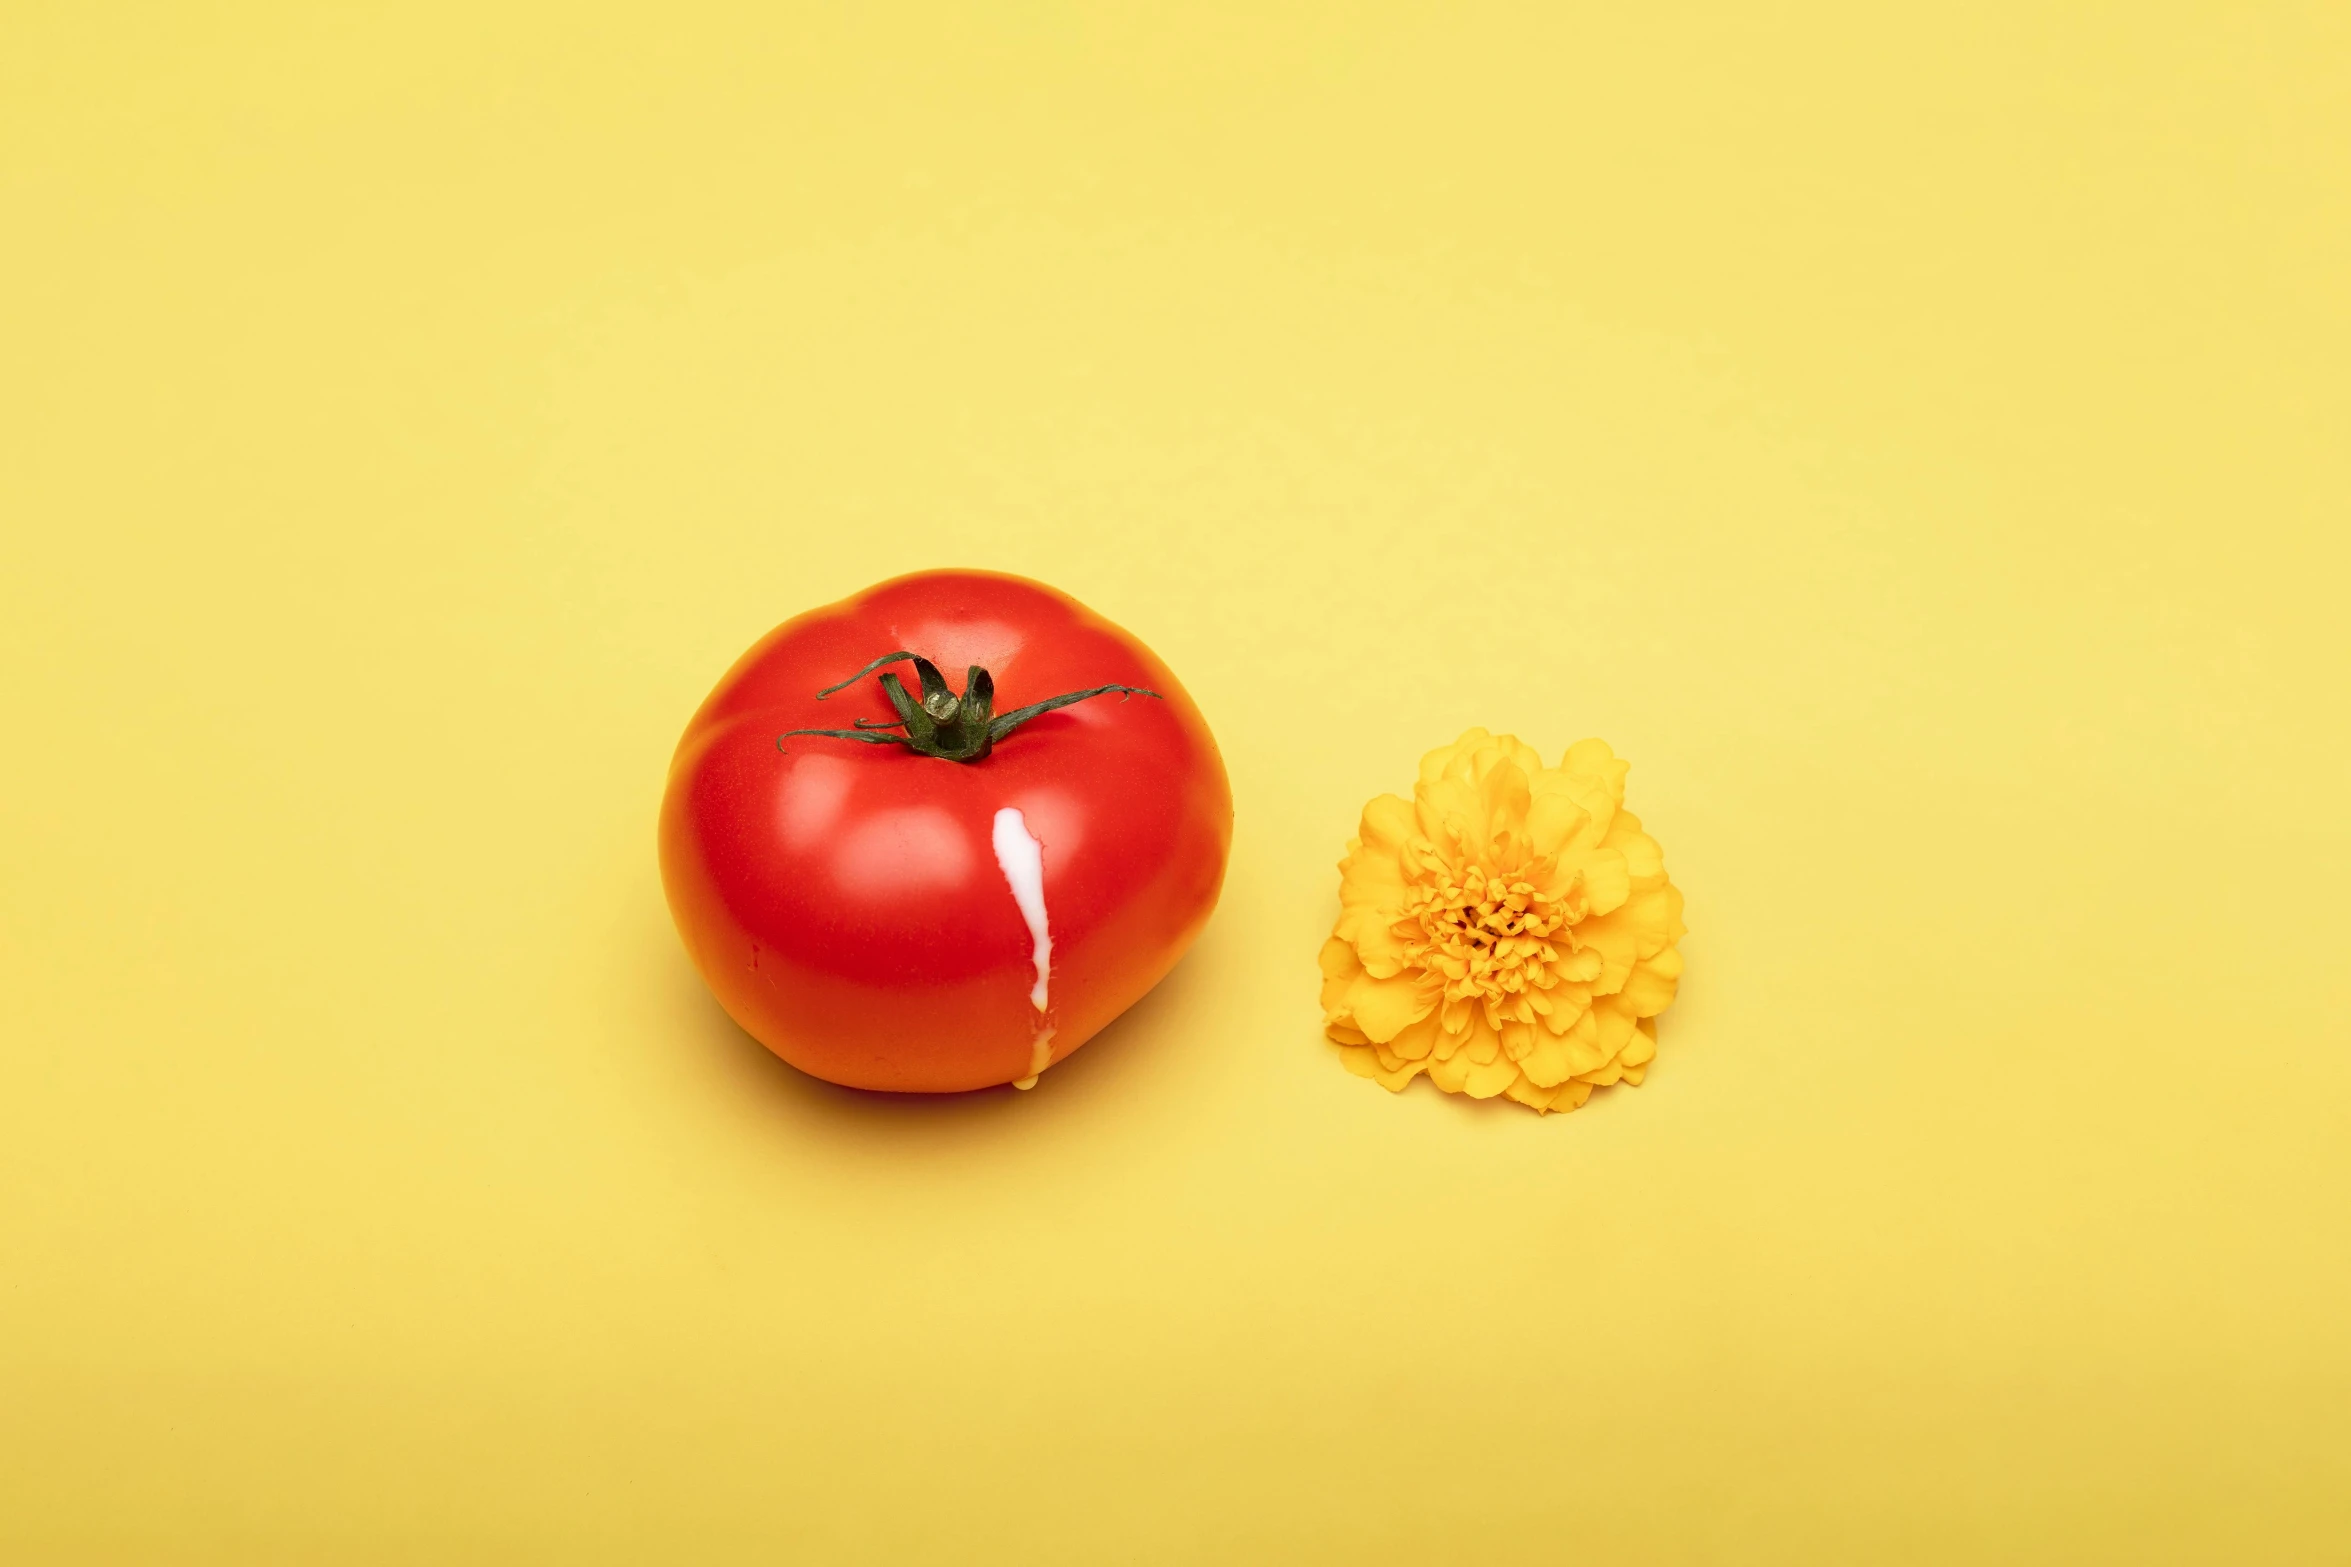 a whole tomato and a yellow flower on a yellow surface